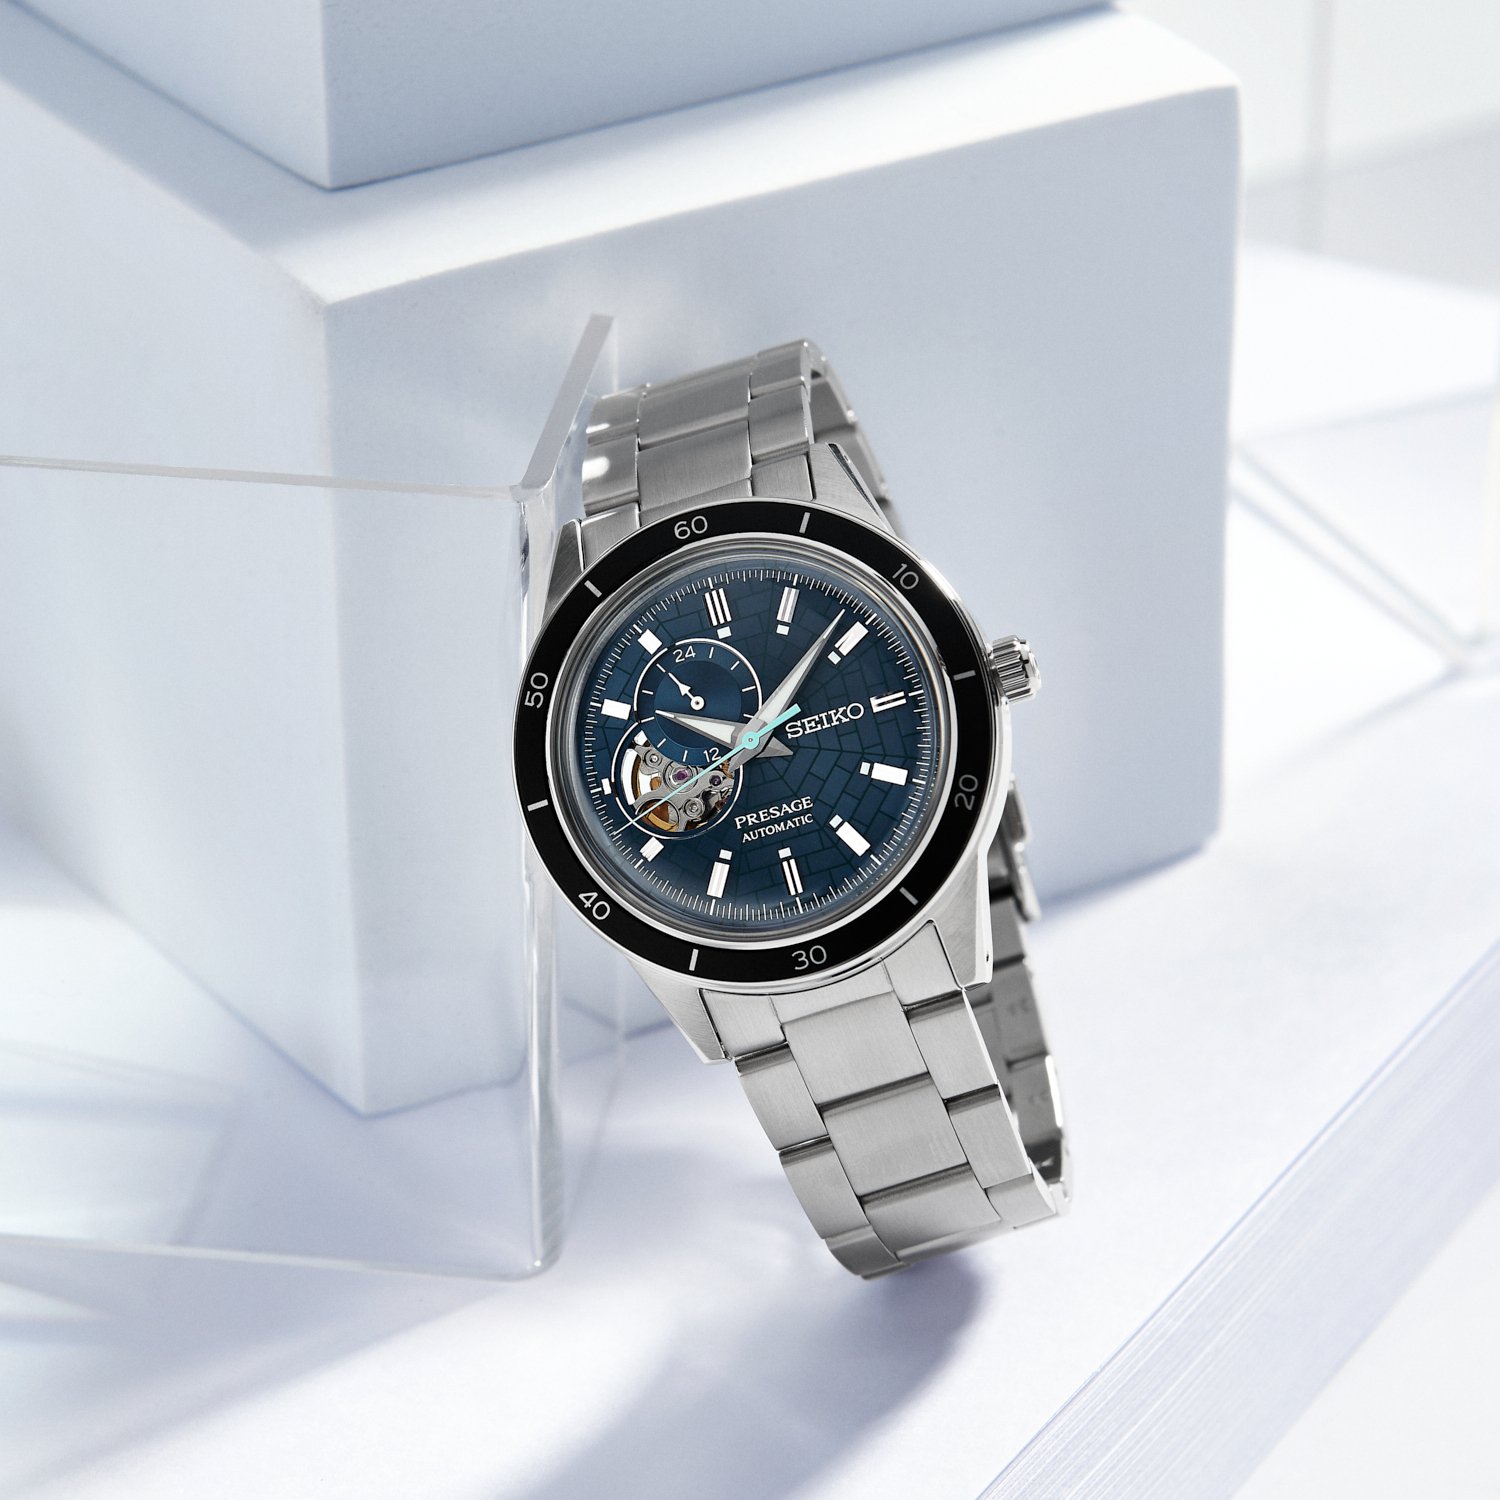 Seiko Announces 140th Anniversary 'Ginza' Watches - First Class Watches Blog